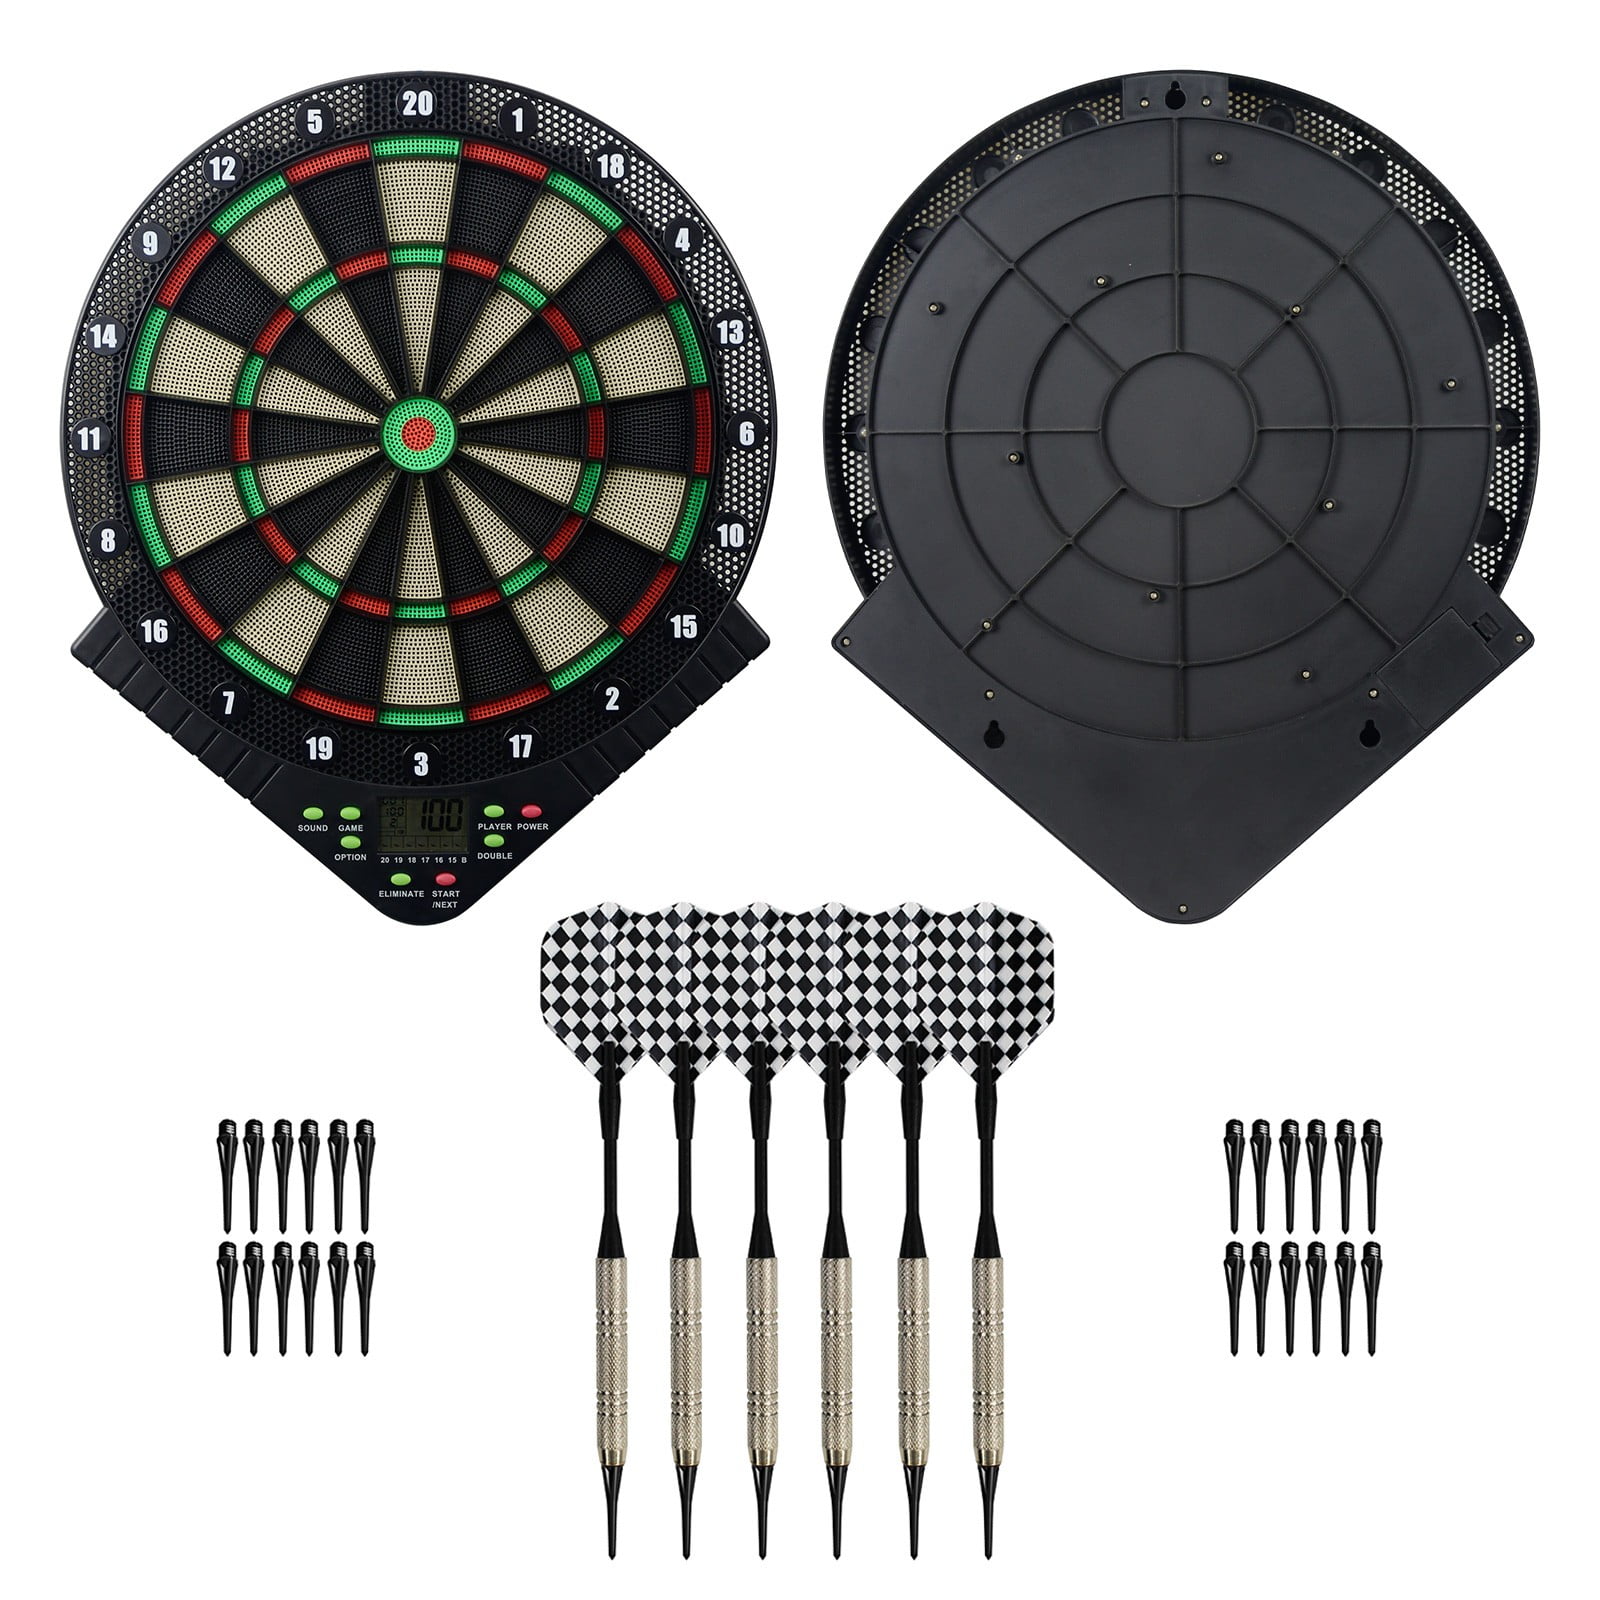 6-Counted Plastic Safety Soft Tip Darts for Soft Electronic Dartboard Games 